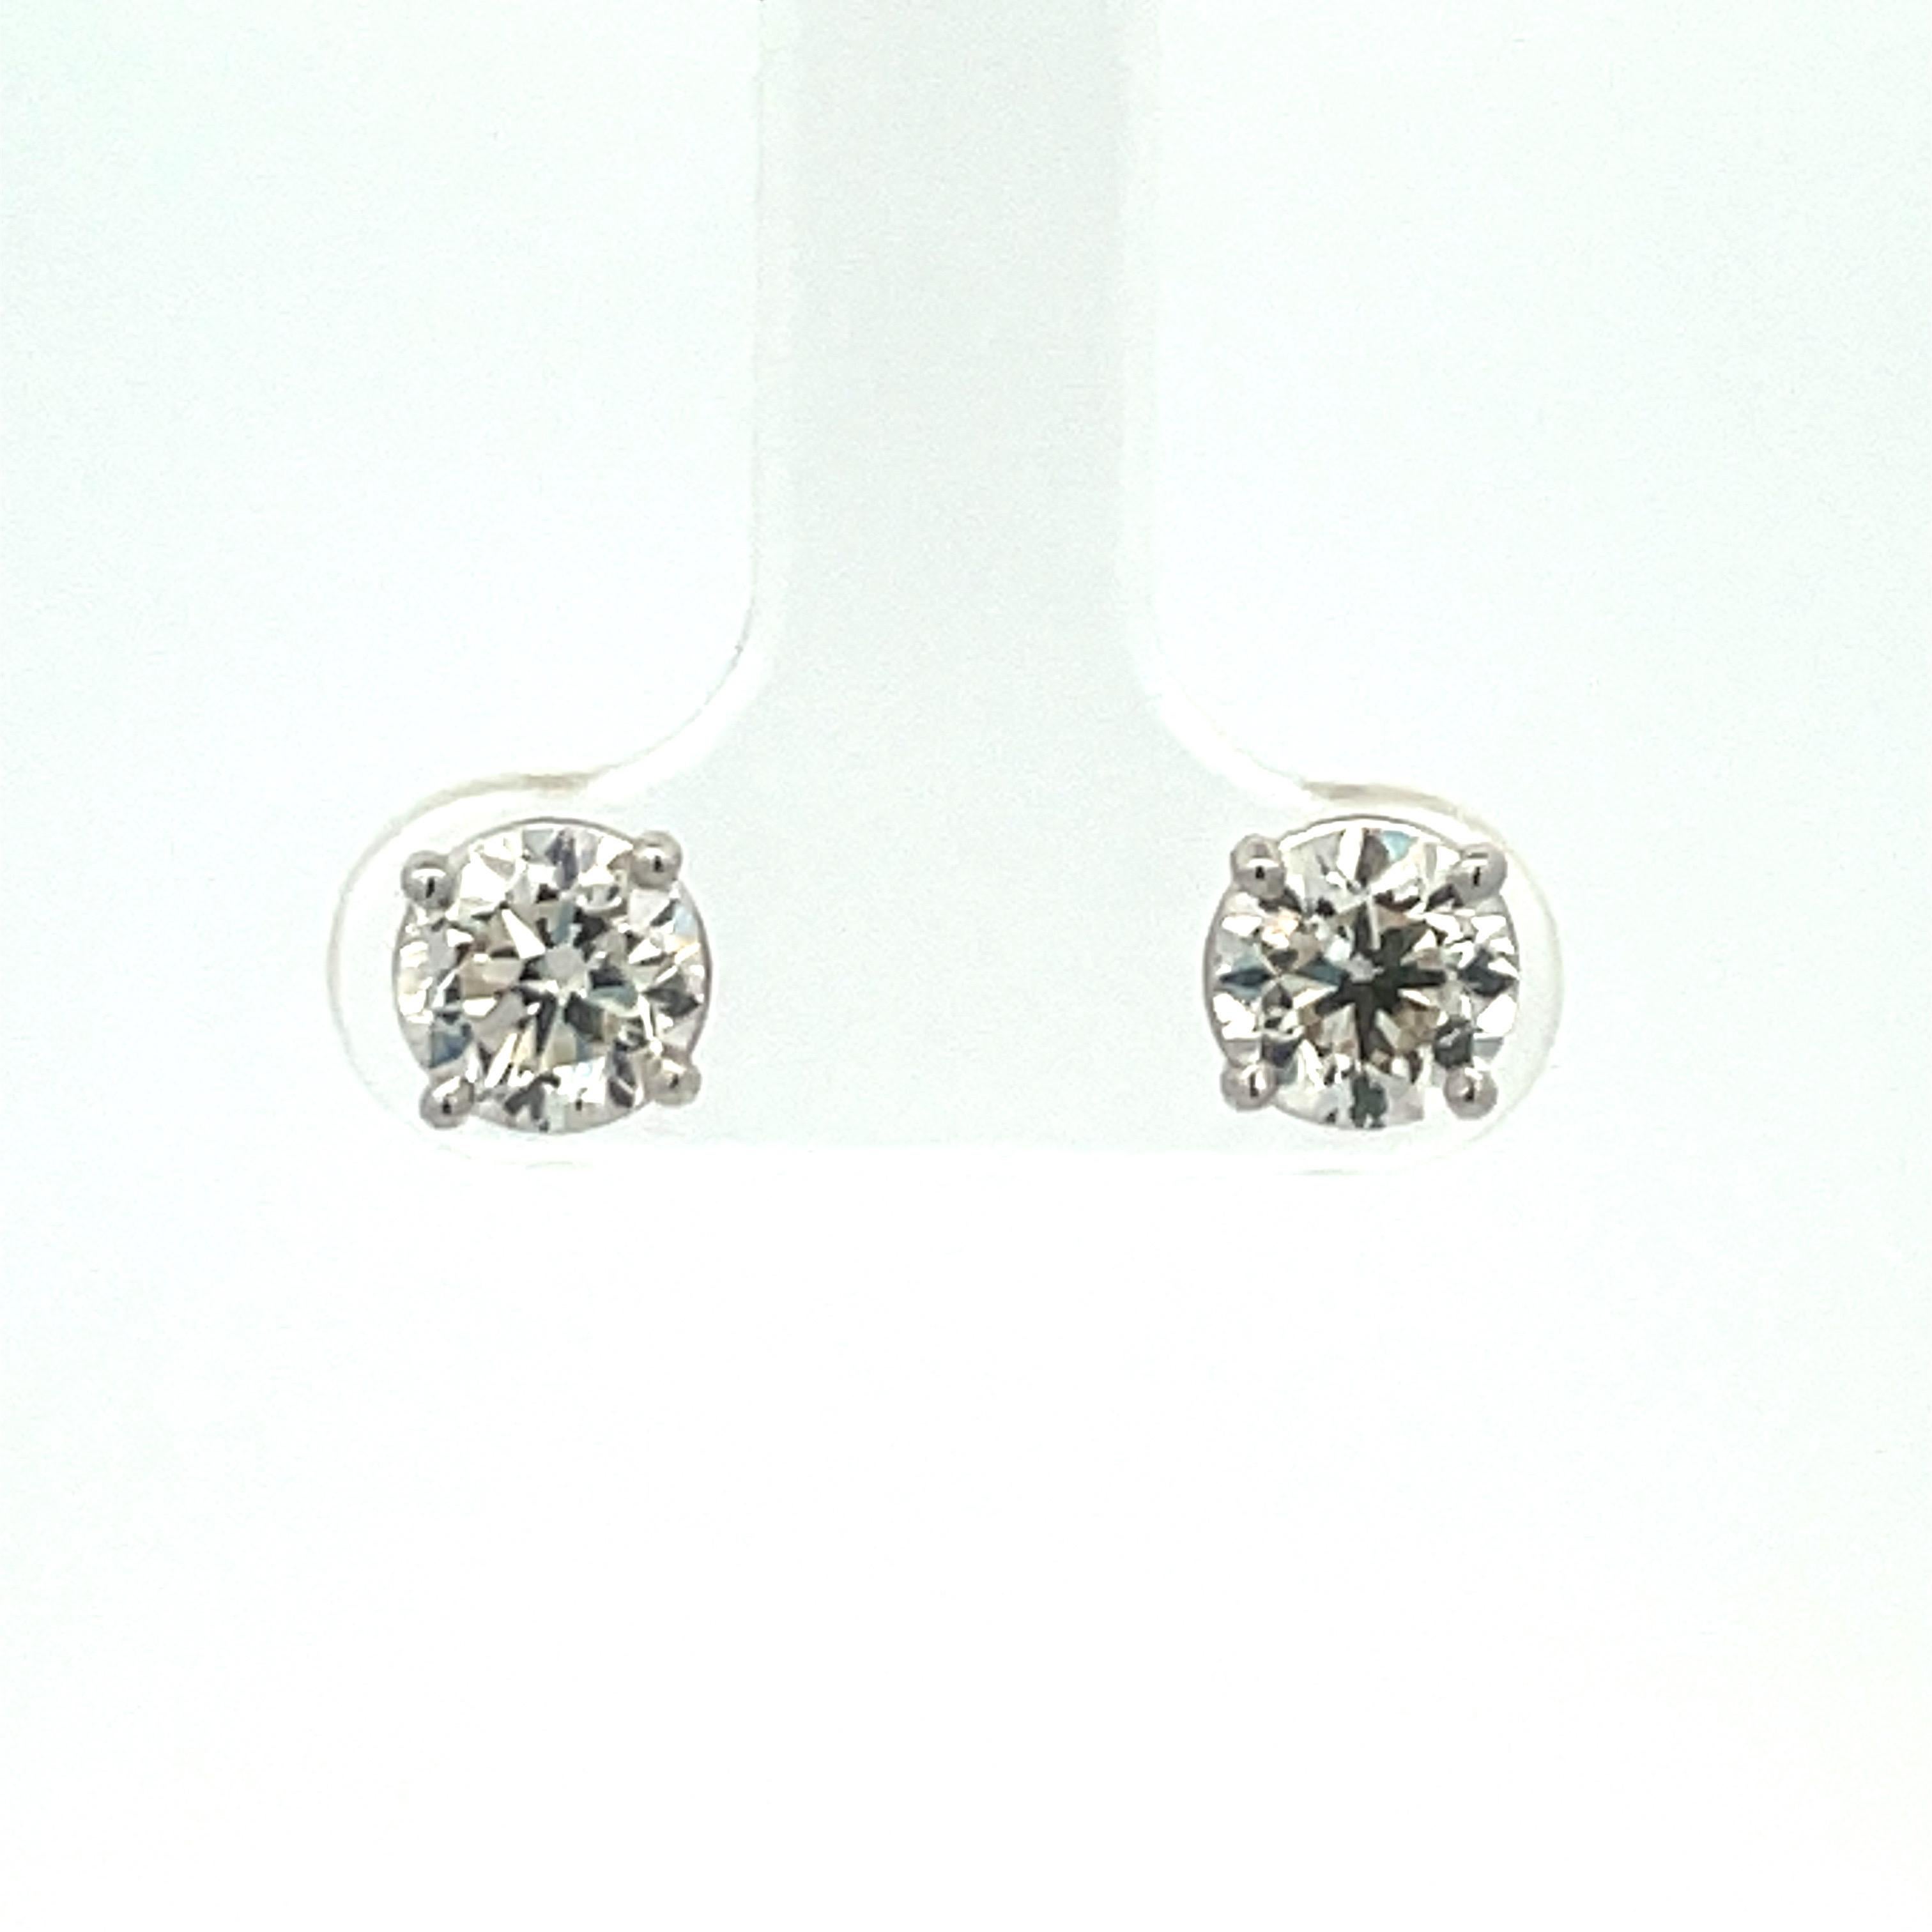 Diamond stud earrings weighing 1.86 Carats, in 14 Karat White Gold 4 Prong Basket Setting.
Color I-J
Clarity VS2

Setting can be changed to a Basket, Martini or Champagne/ 3 or 4 Prong/ 14 or 18 Karat.

DM for more Info & Videos
More Diamond Studs